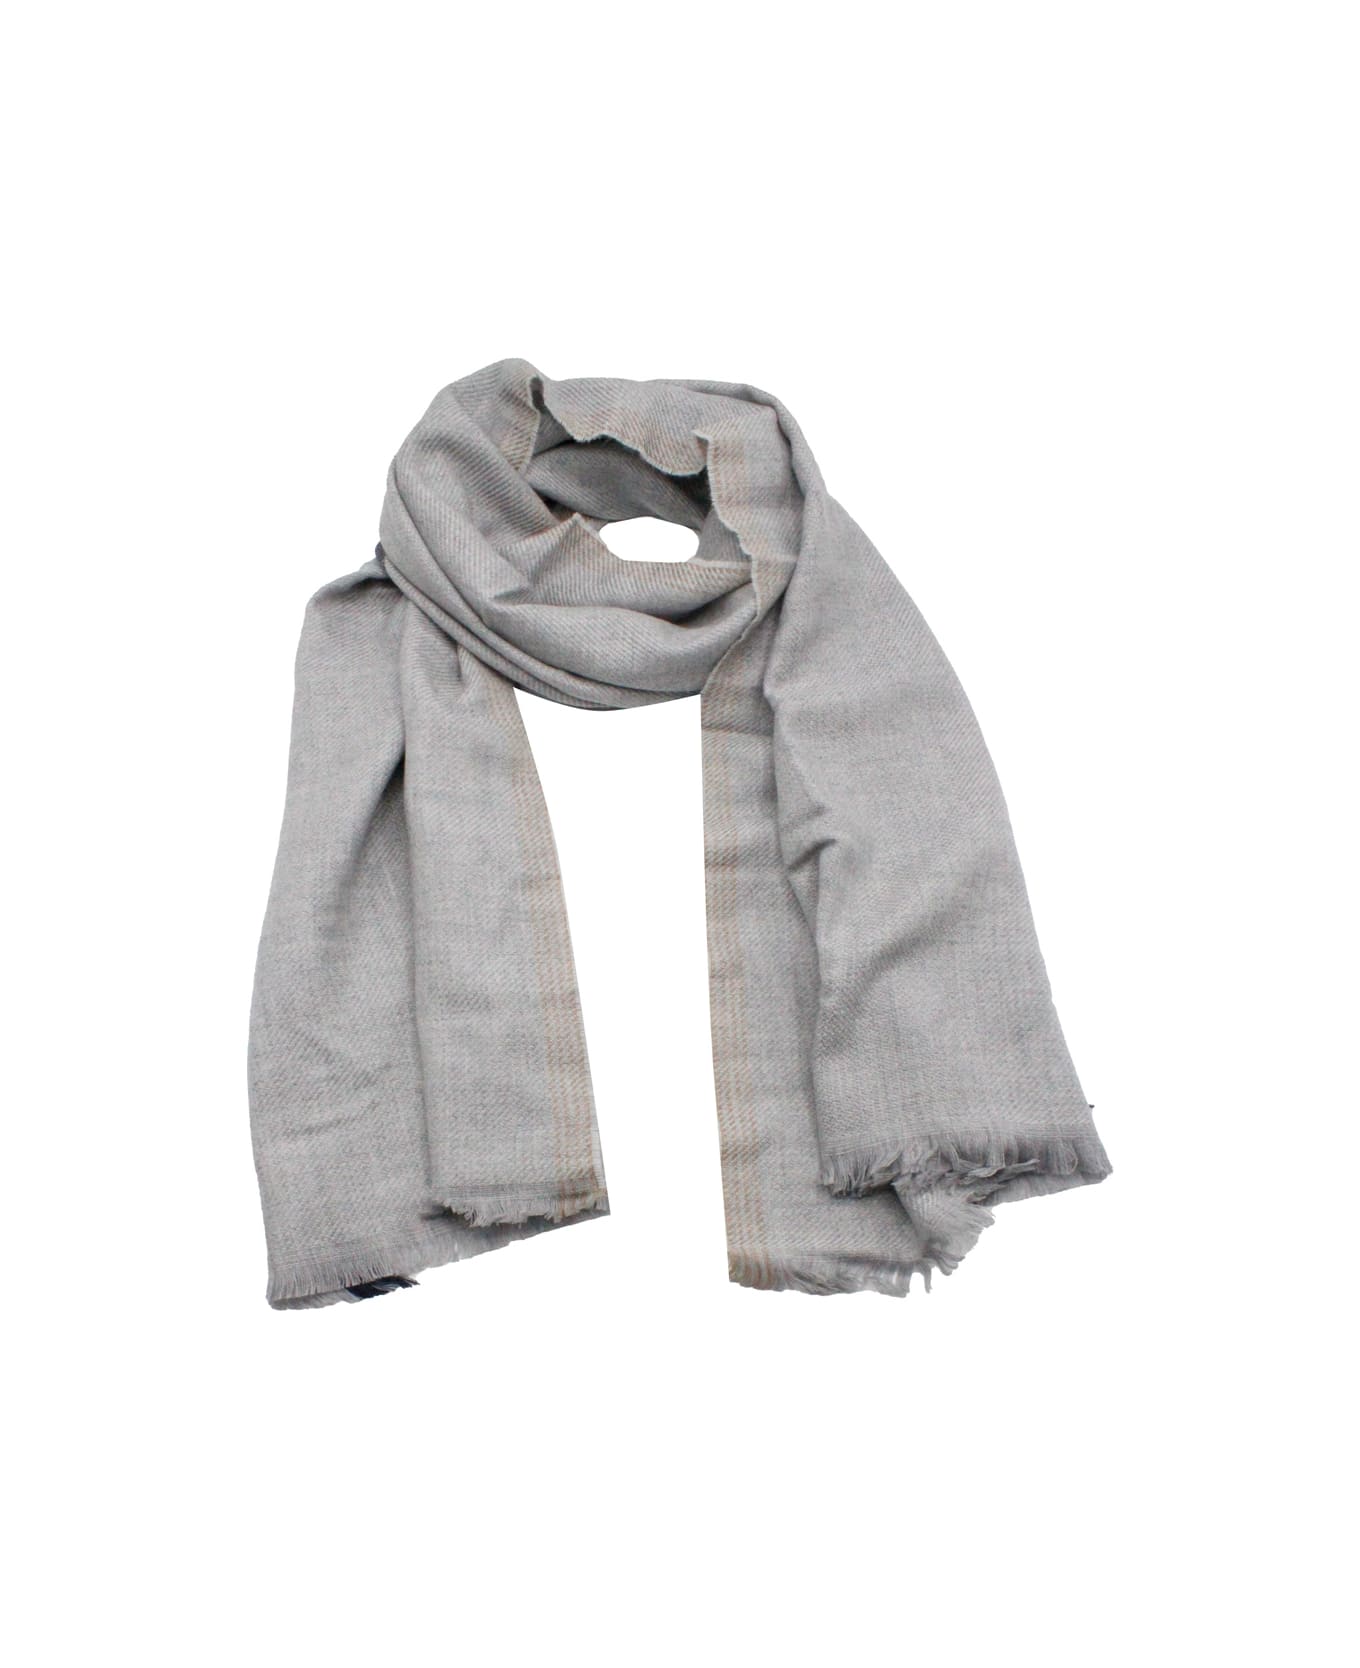 Brunello Cucinelli Lightweight Scarf Made Of Wool And Cashmere With A Light Weave In Diagonaòle And Side Selvedge With Small Fringes At The Bottom - Grey